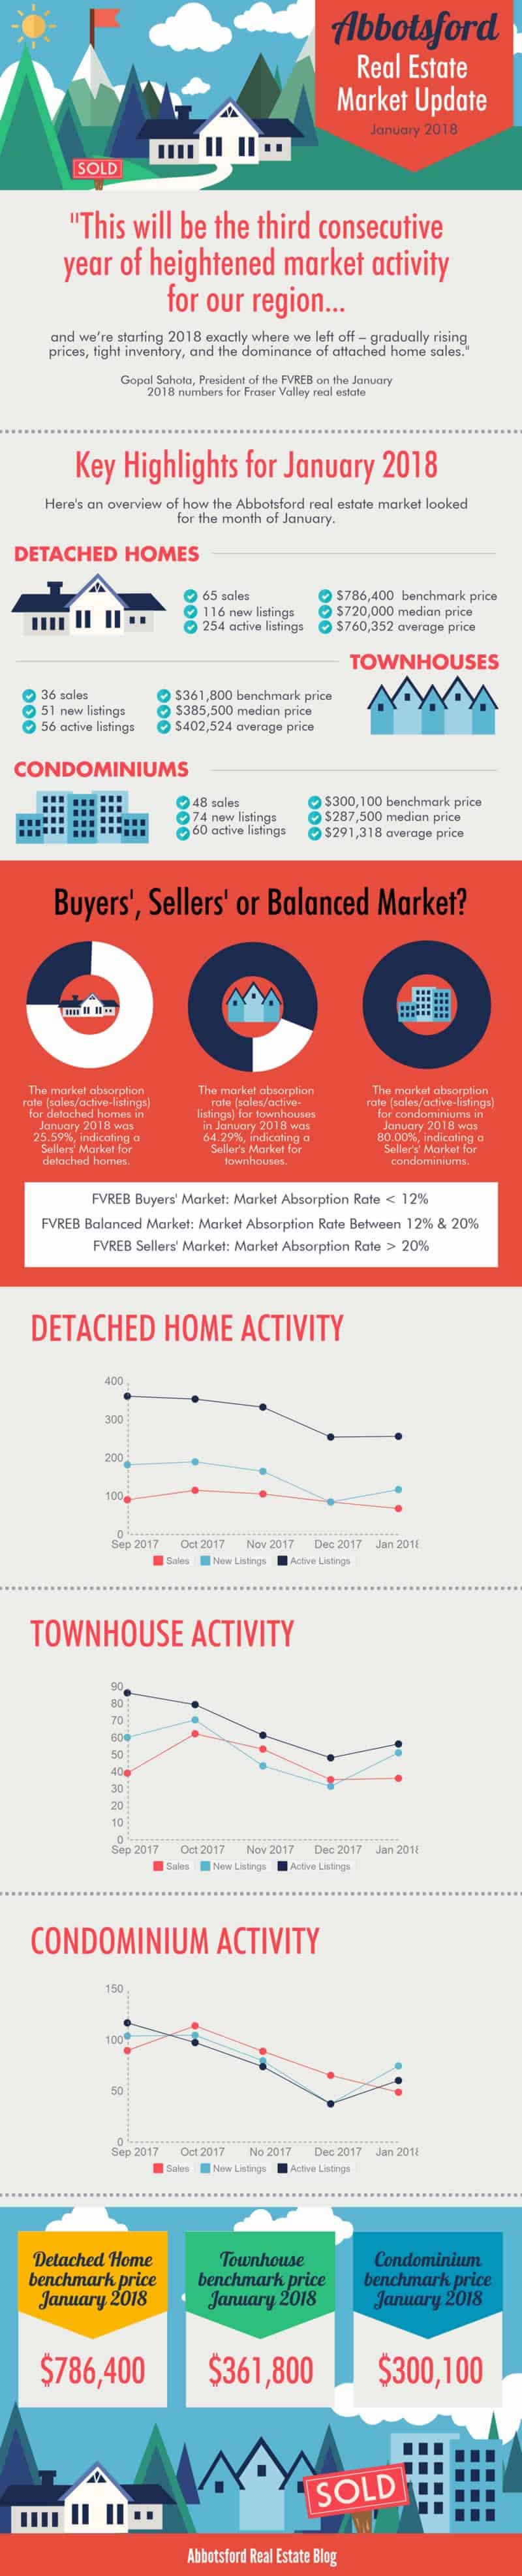 Abbotsford Townhouse Market Update January 2018 Infographic